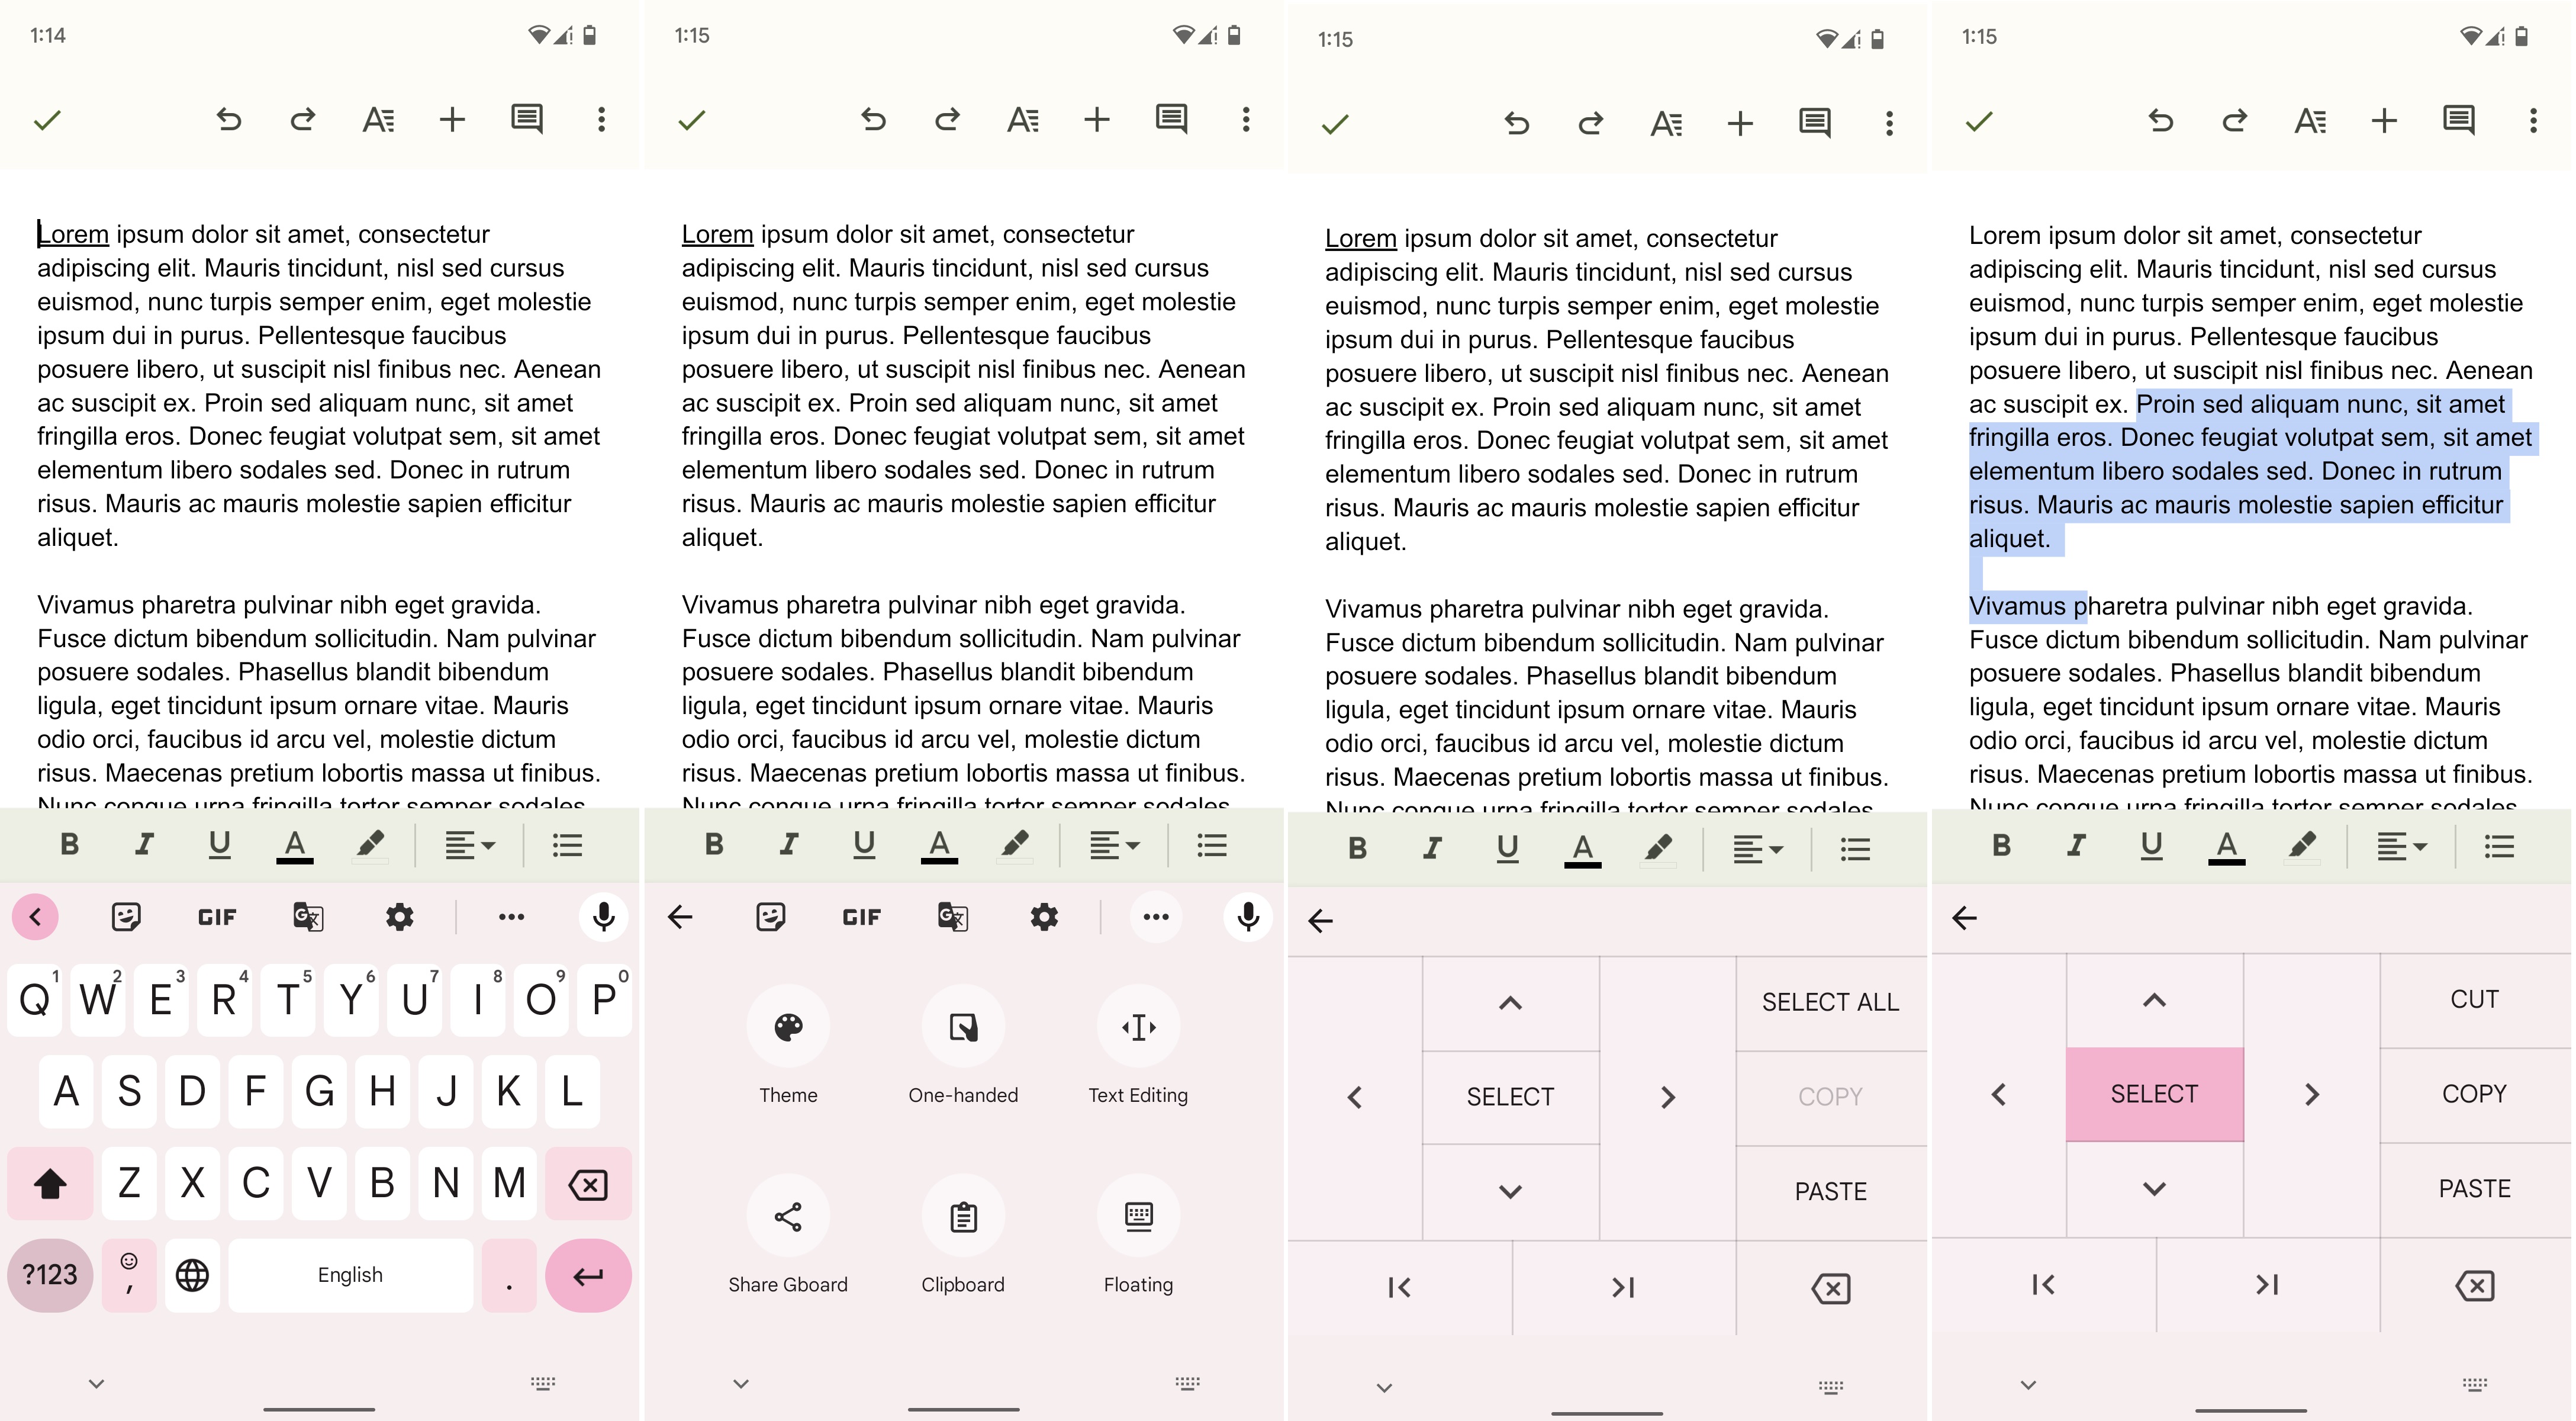 How to use the text editor in Gboard